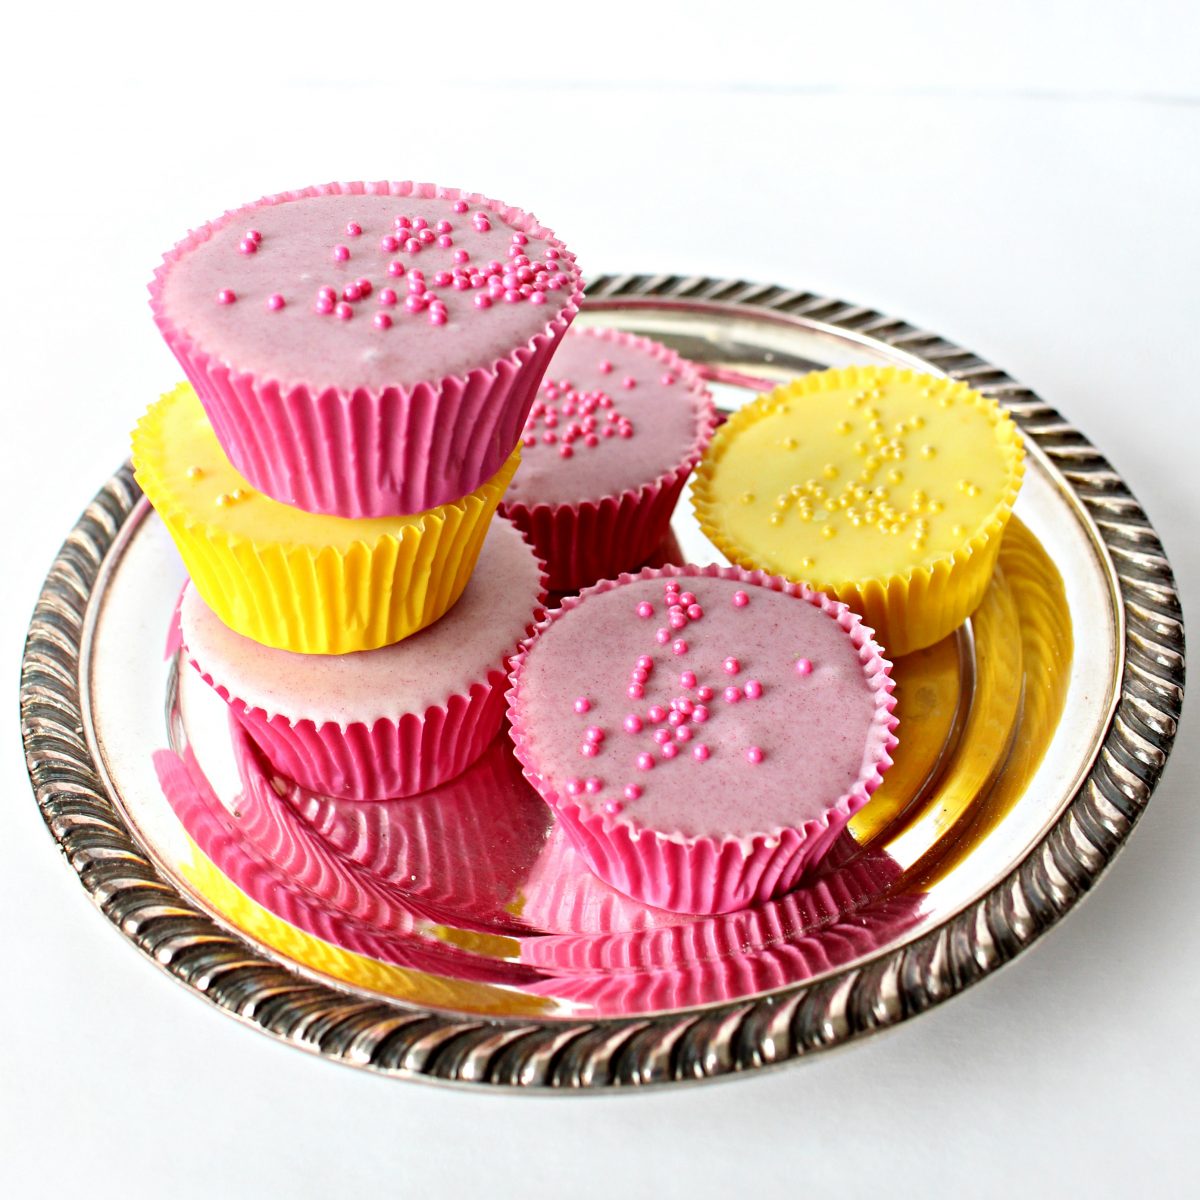 Purple and yellow Peanut Butter Cups on a silver serving platter.